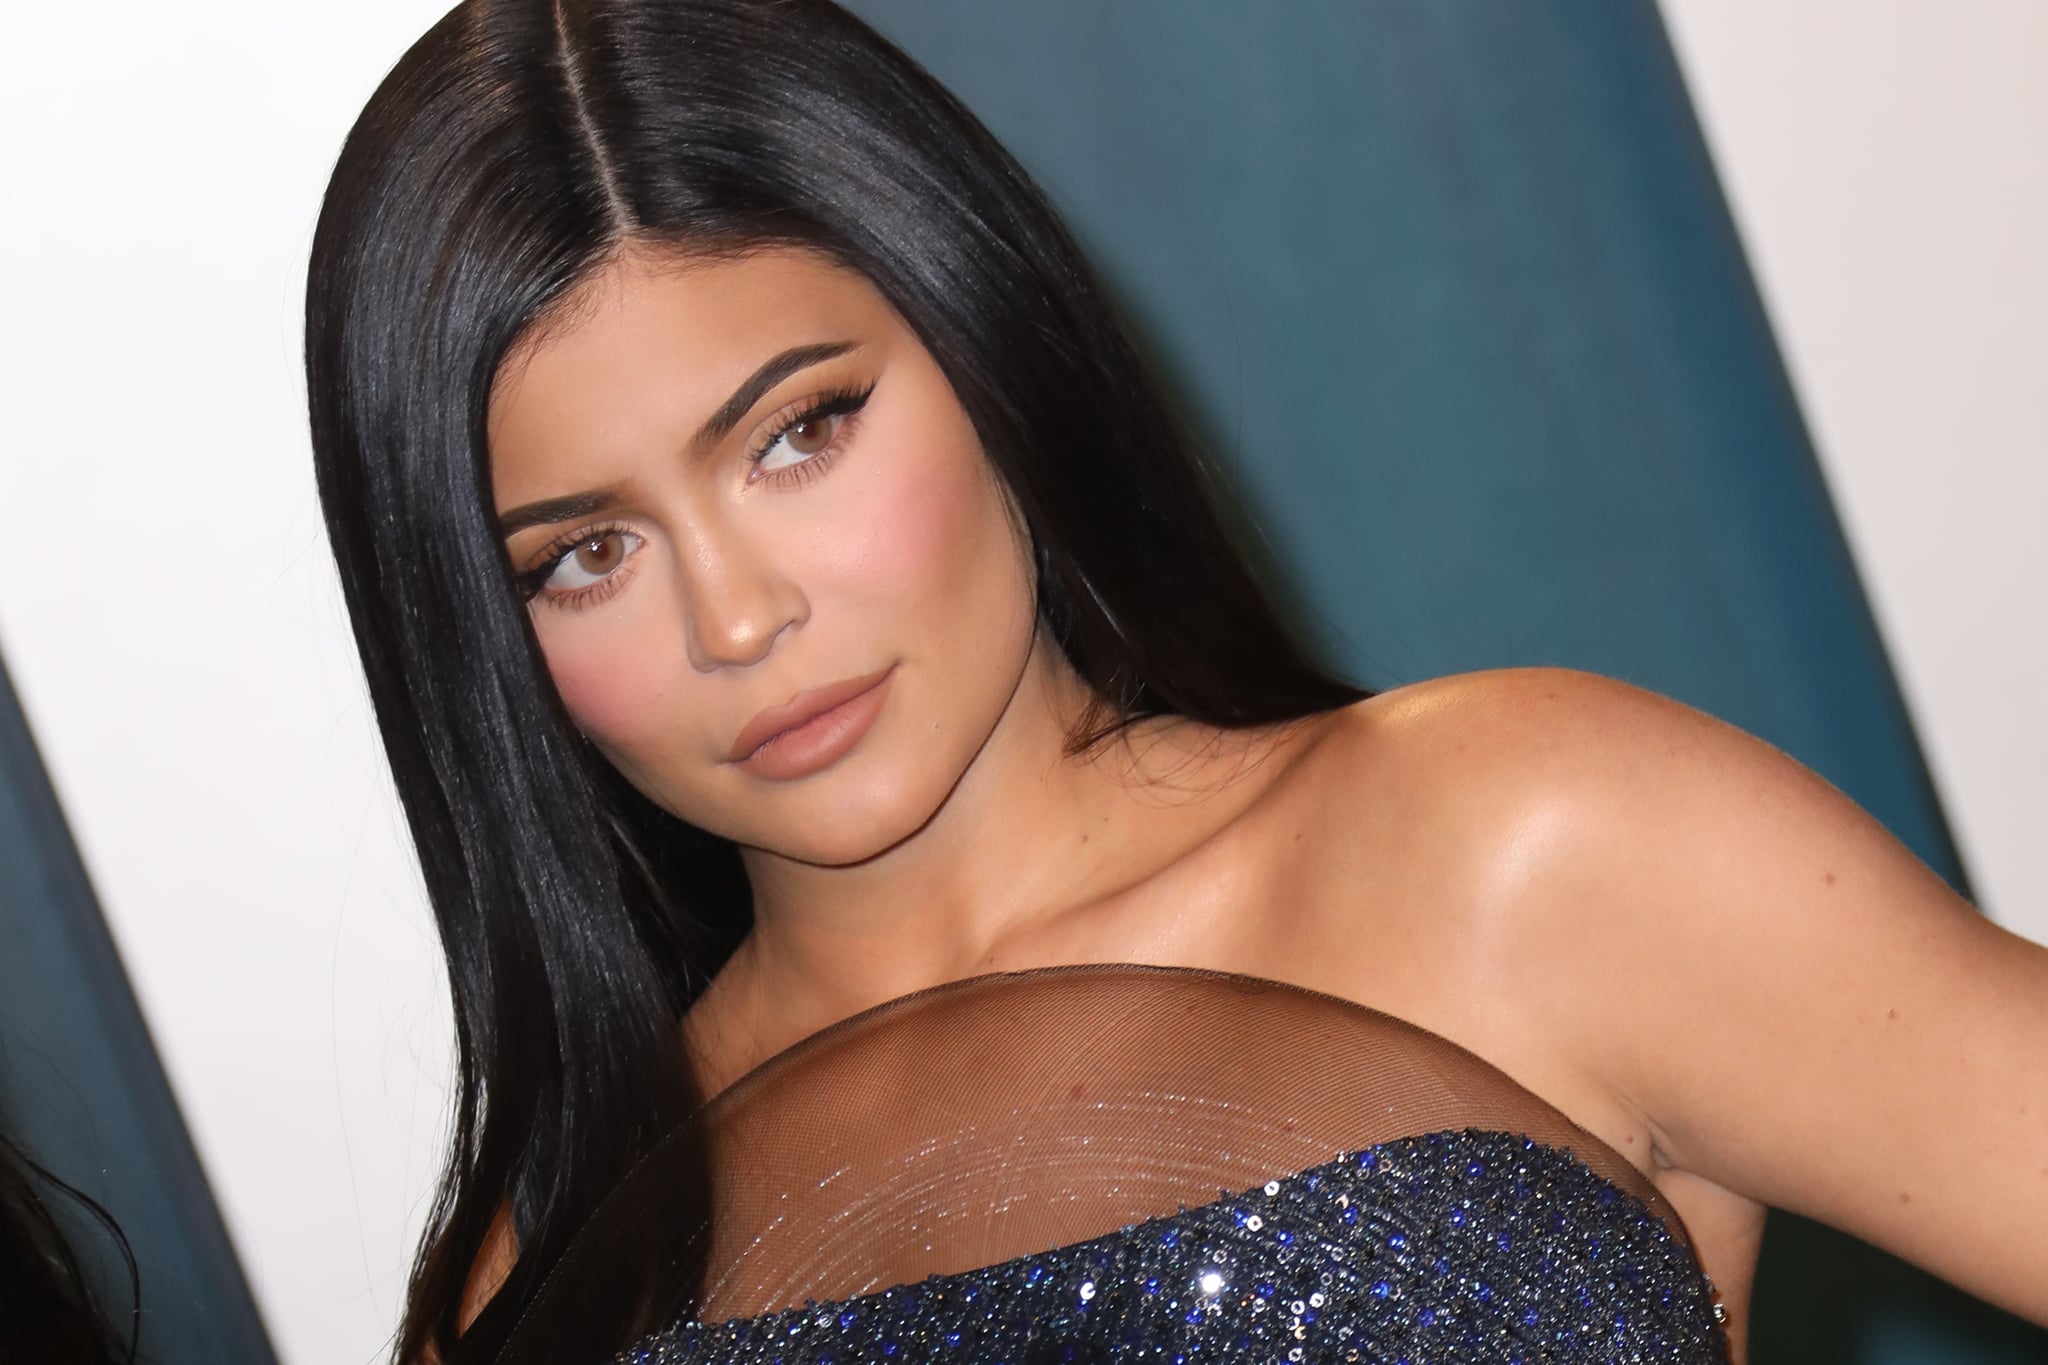 BEVERLY HILLS, CALIFORNIA - FEBRUARY 09:  Kylie Jenner attends the 2020 Vanity Fair Oscar Party at Wallis Annenberg Centre for the Performing Arts on February 09, 2020 in Beverly Hills, California. (Photo by Toni Anne Barson/WireImage)